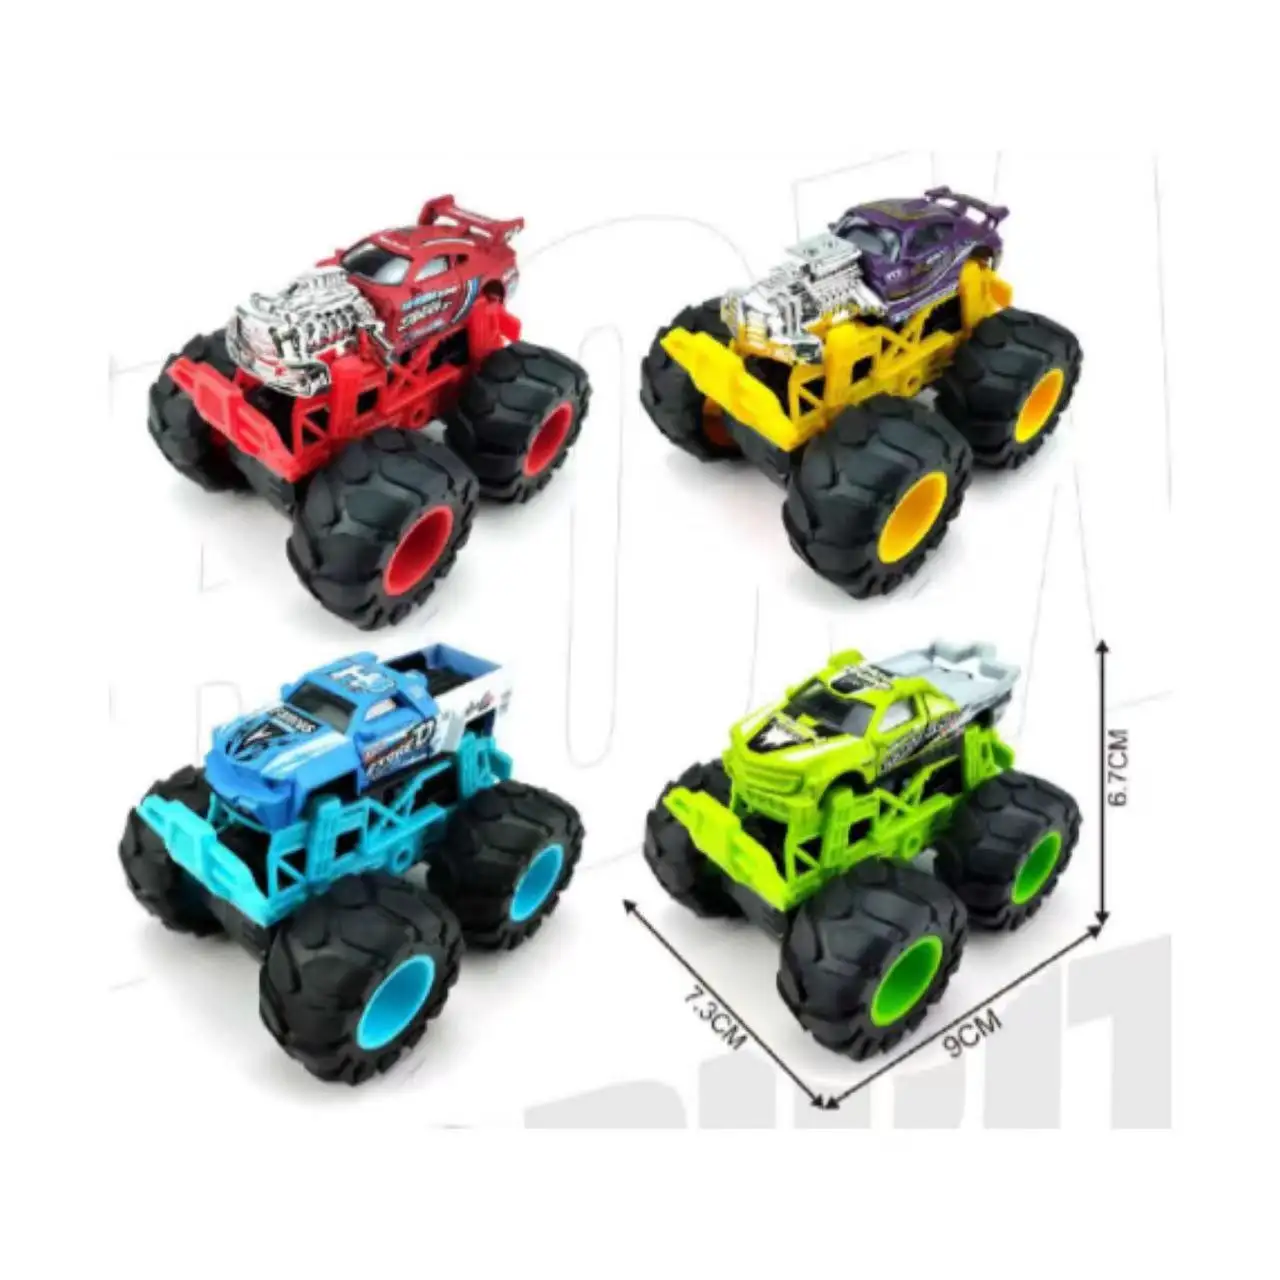 High quality 1:64 Hot Free Wheel Slide pocket toys diecast Best Selling 4 large wheels Alloy Cars Metal Vehicle Toys